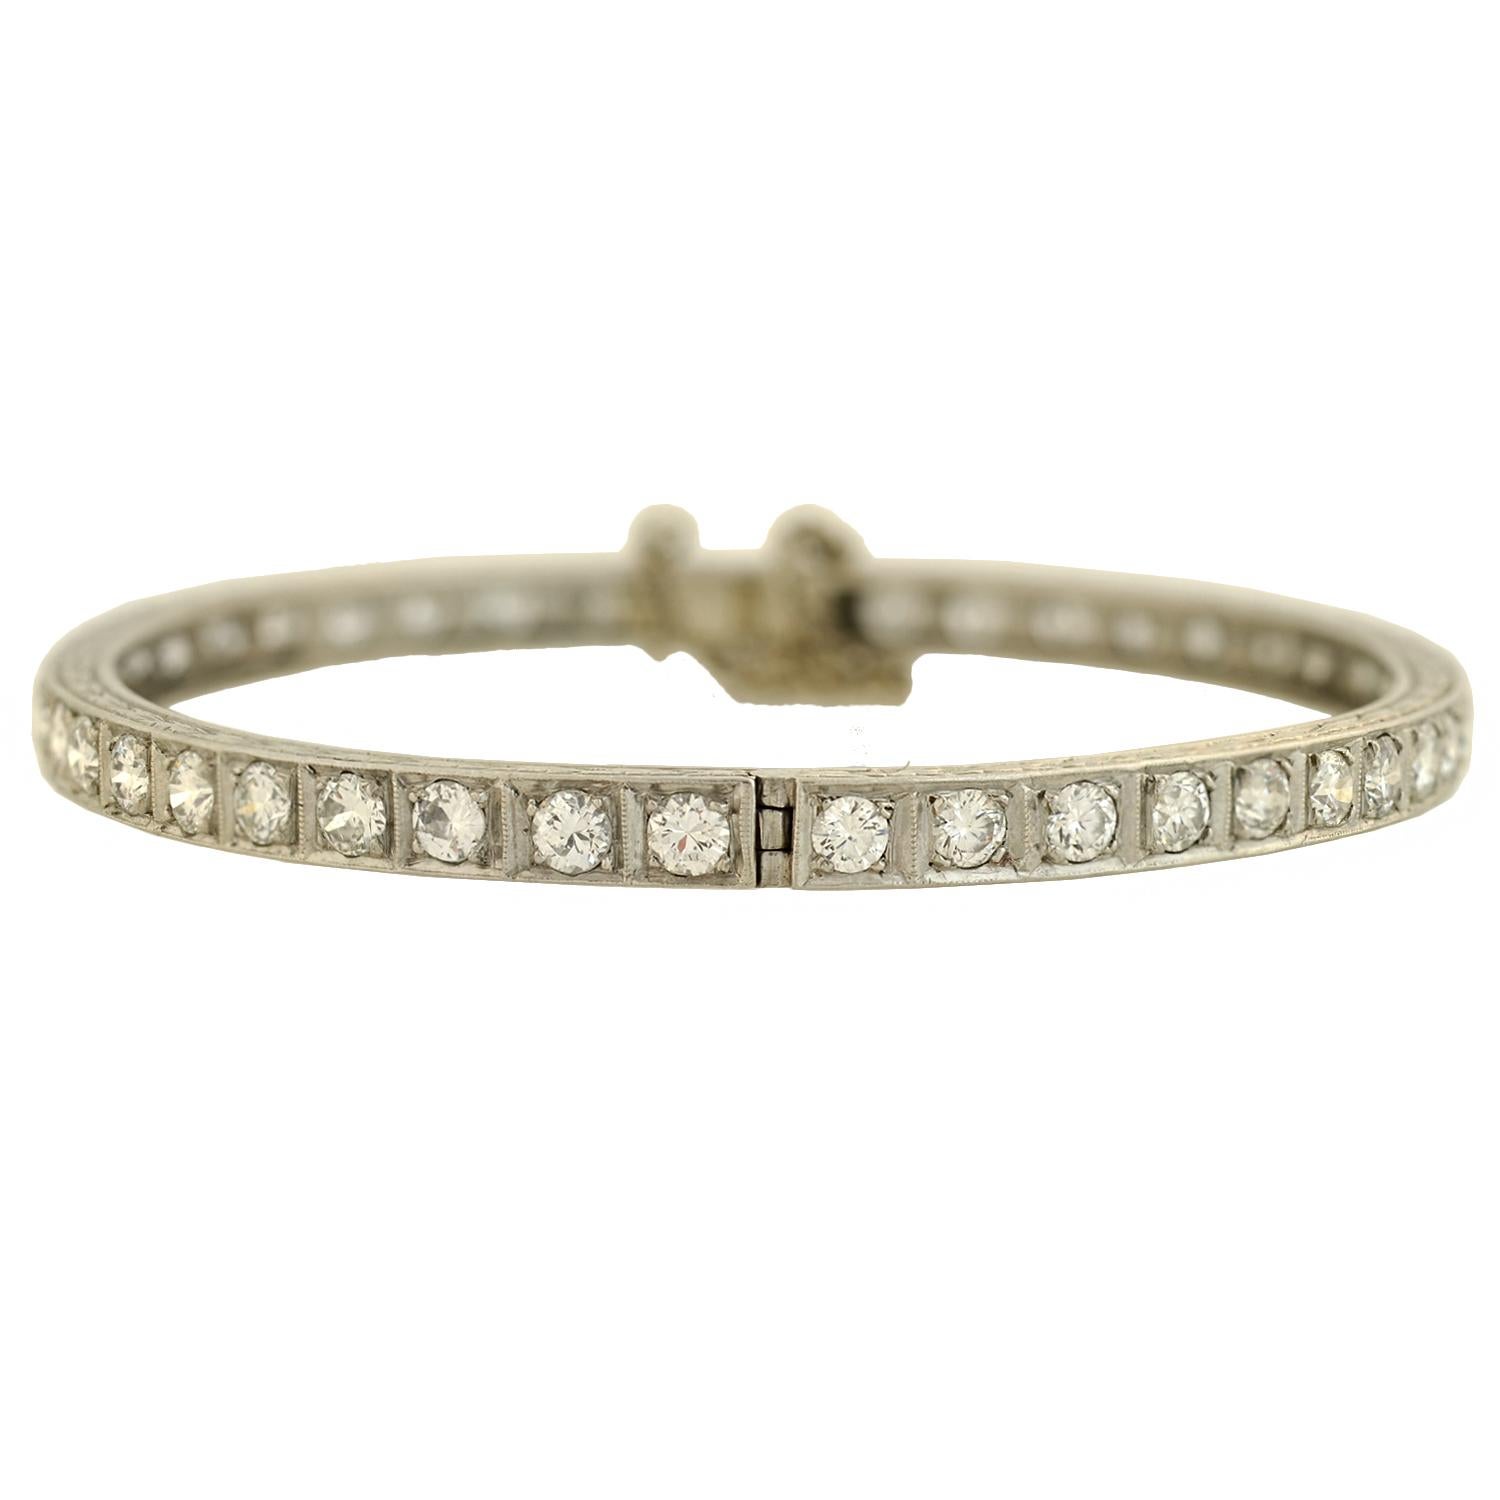 A beautiful diamond bangle bracelet from the Art Deco (ca1920) era! This stunning piece is crafted in platinum and lined with sparkling old European Cut diamonds. Each stone is prong set in a box setting, mimicking the look of a classic line